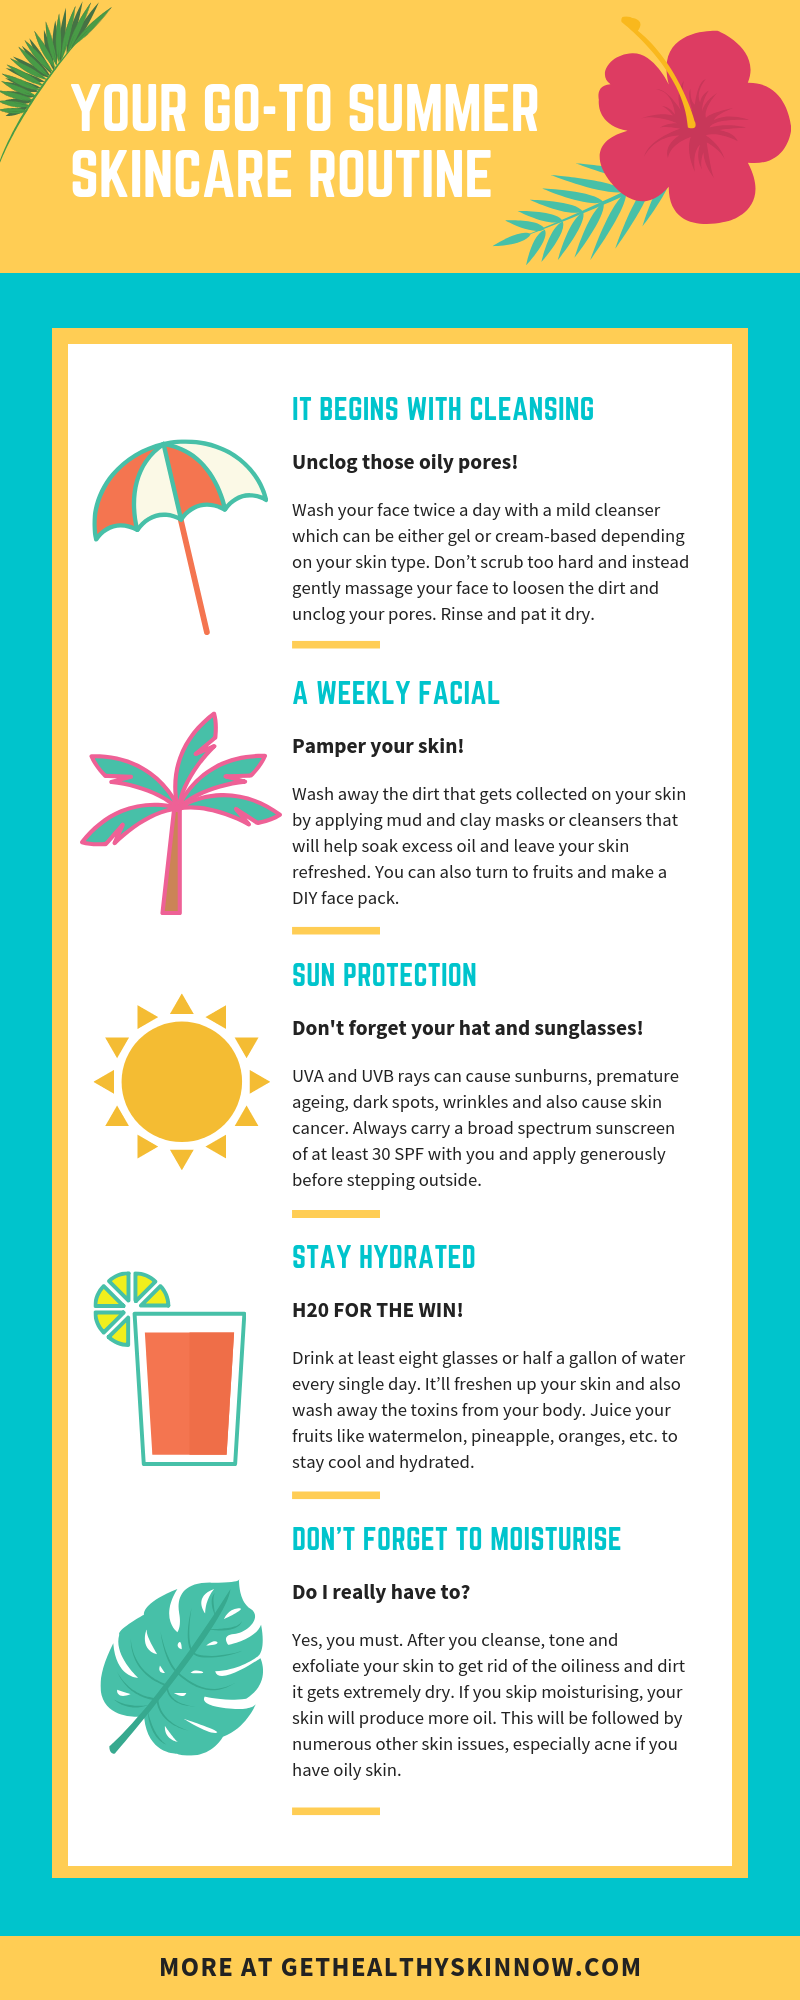 How to Care for Your Skin in Hot, Humid Weather - Get Healthy Skin Now